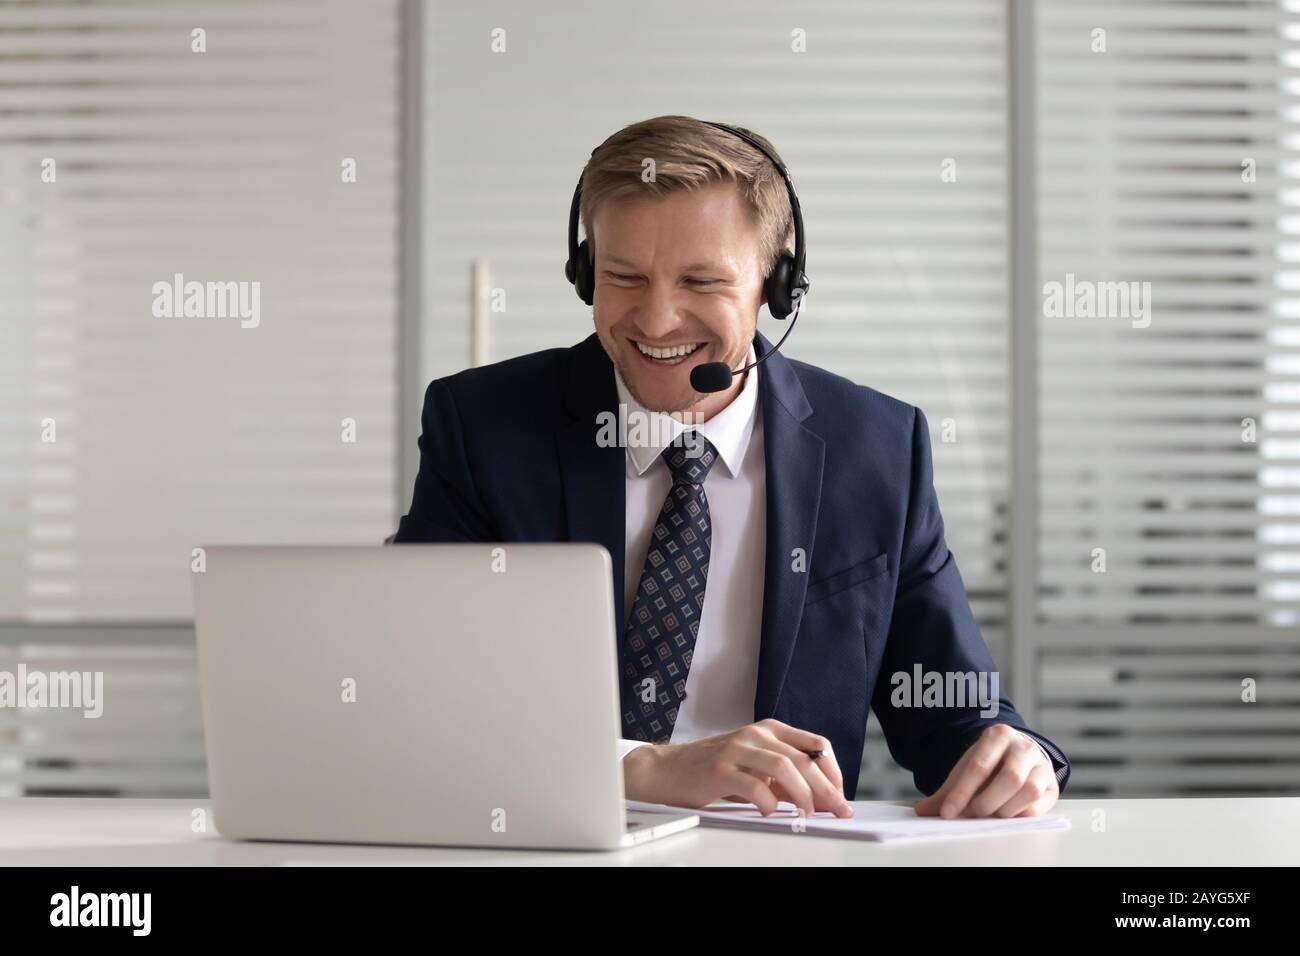 Smiling male employee make notes having video call with client Stock Photo